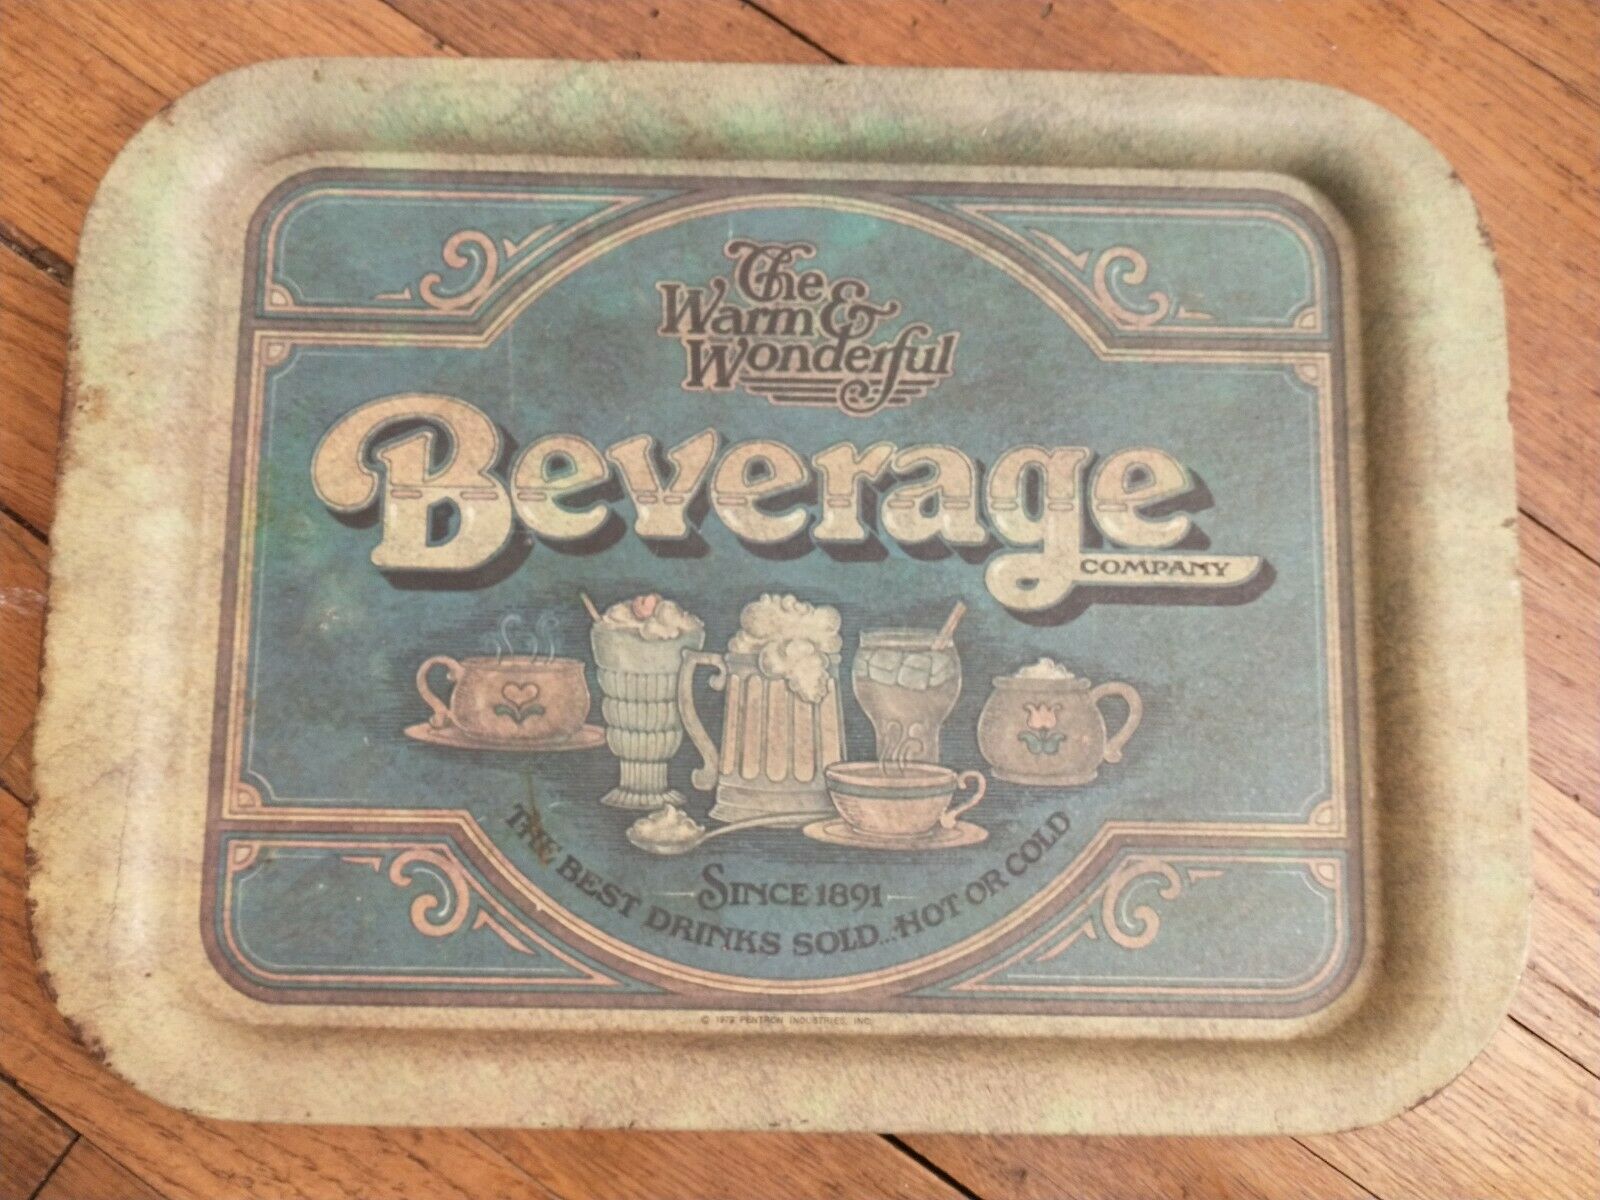 Vintage 70's The Warm And Wonderful Beverage Company Tin Serving Tray.